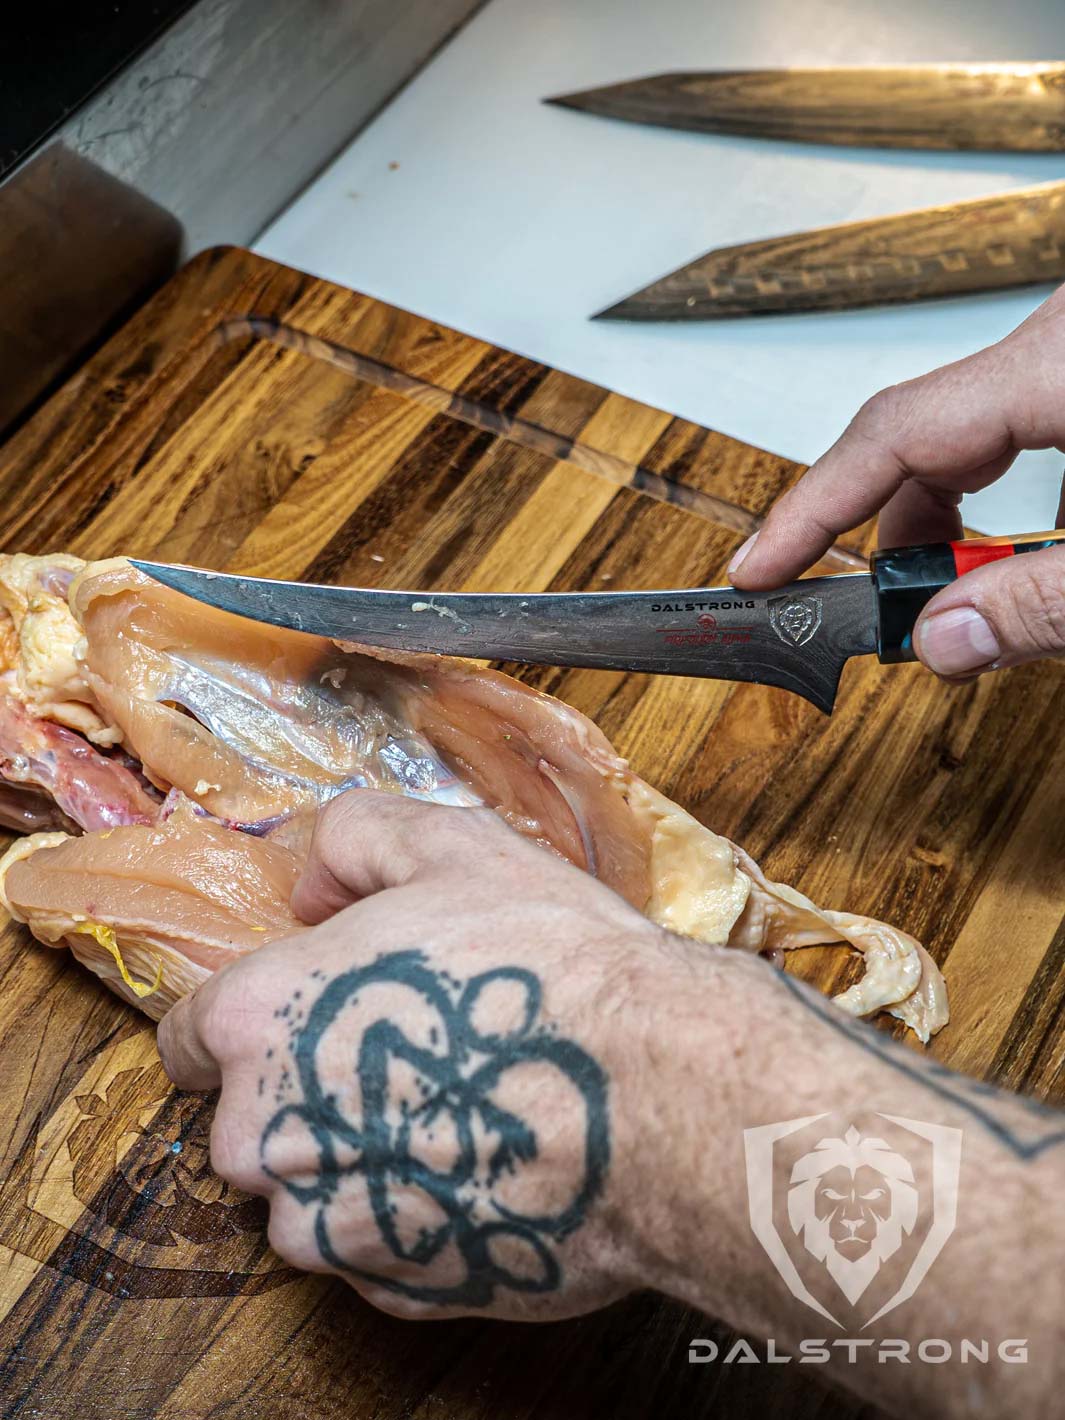 Dalstrong firestorm alpa series 6 inch curved boning knife deboning a chicken meat on a cutting board.